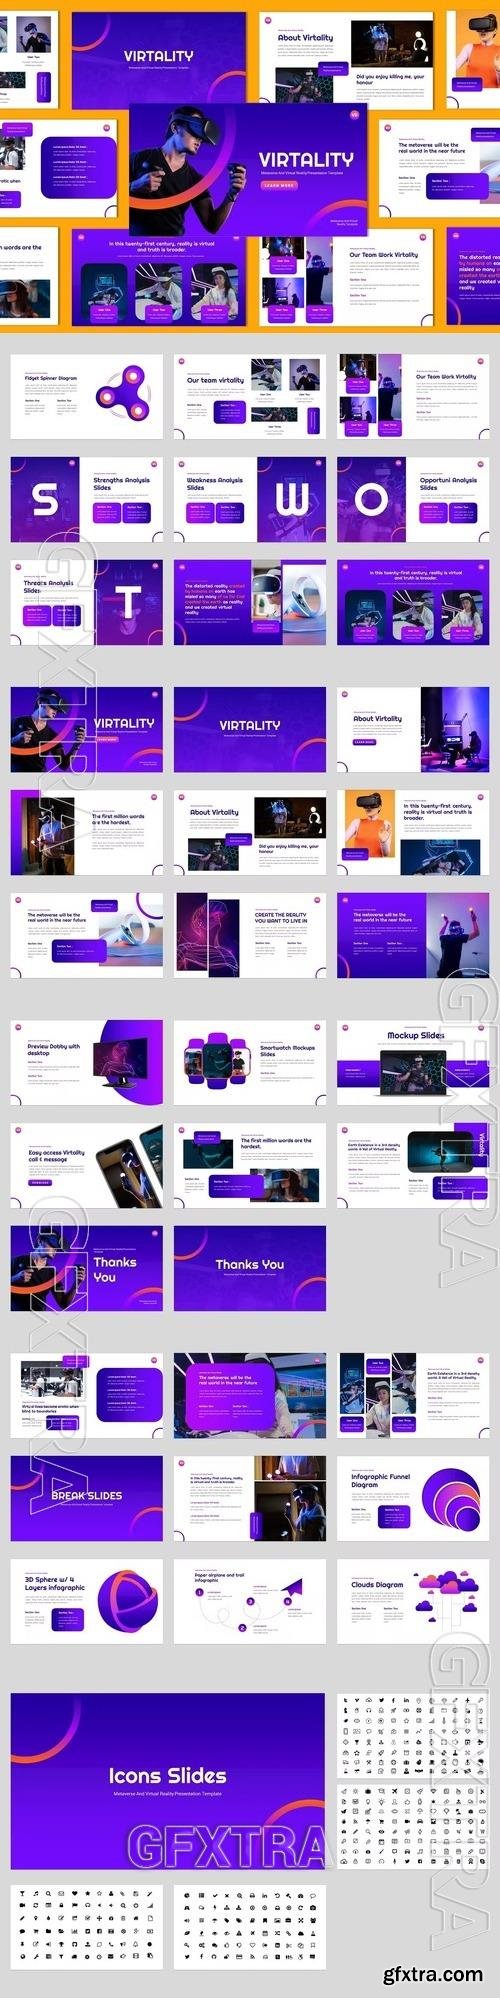 Metaverse and Virtual Reality Powerpoint Template RVJCZH7